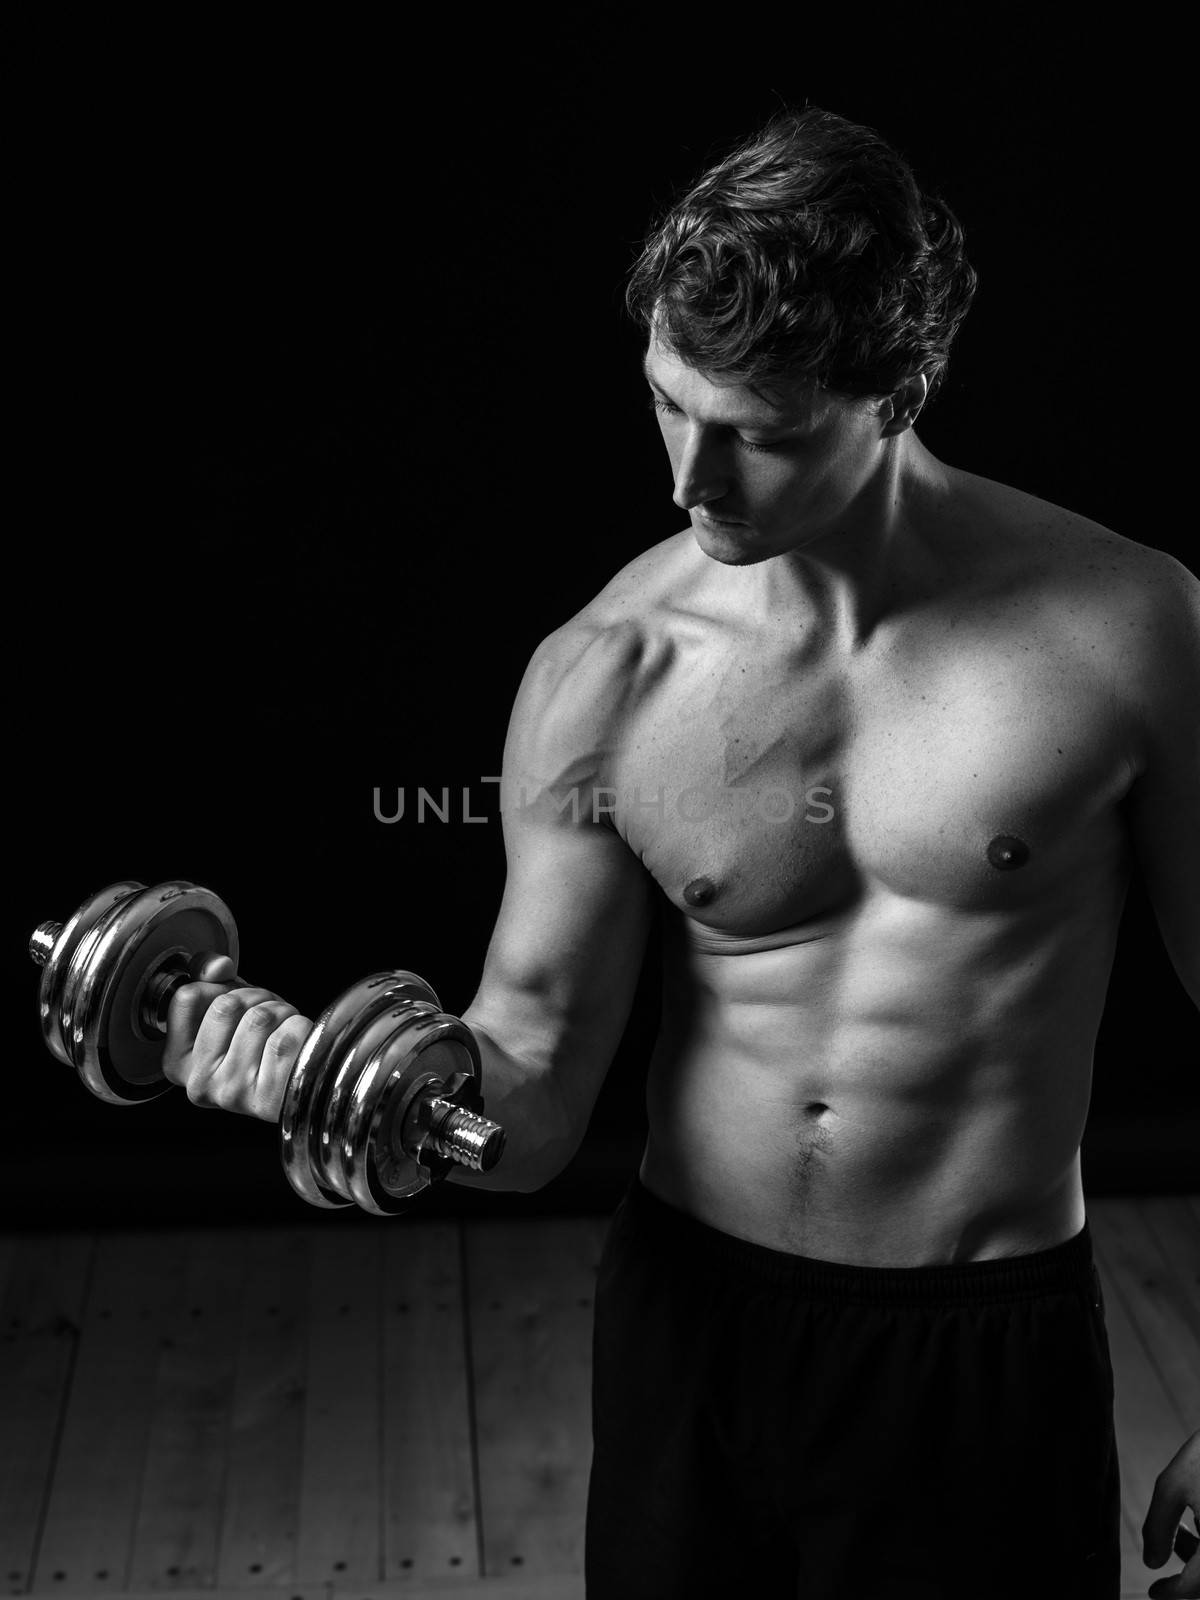 Photo of a man in his early thirties doing bicep curls with a dumbbell over a black background. Black and white version.